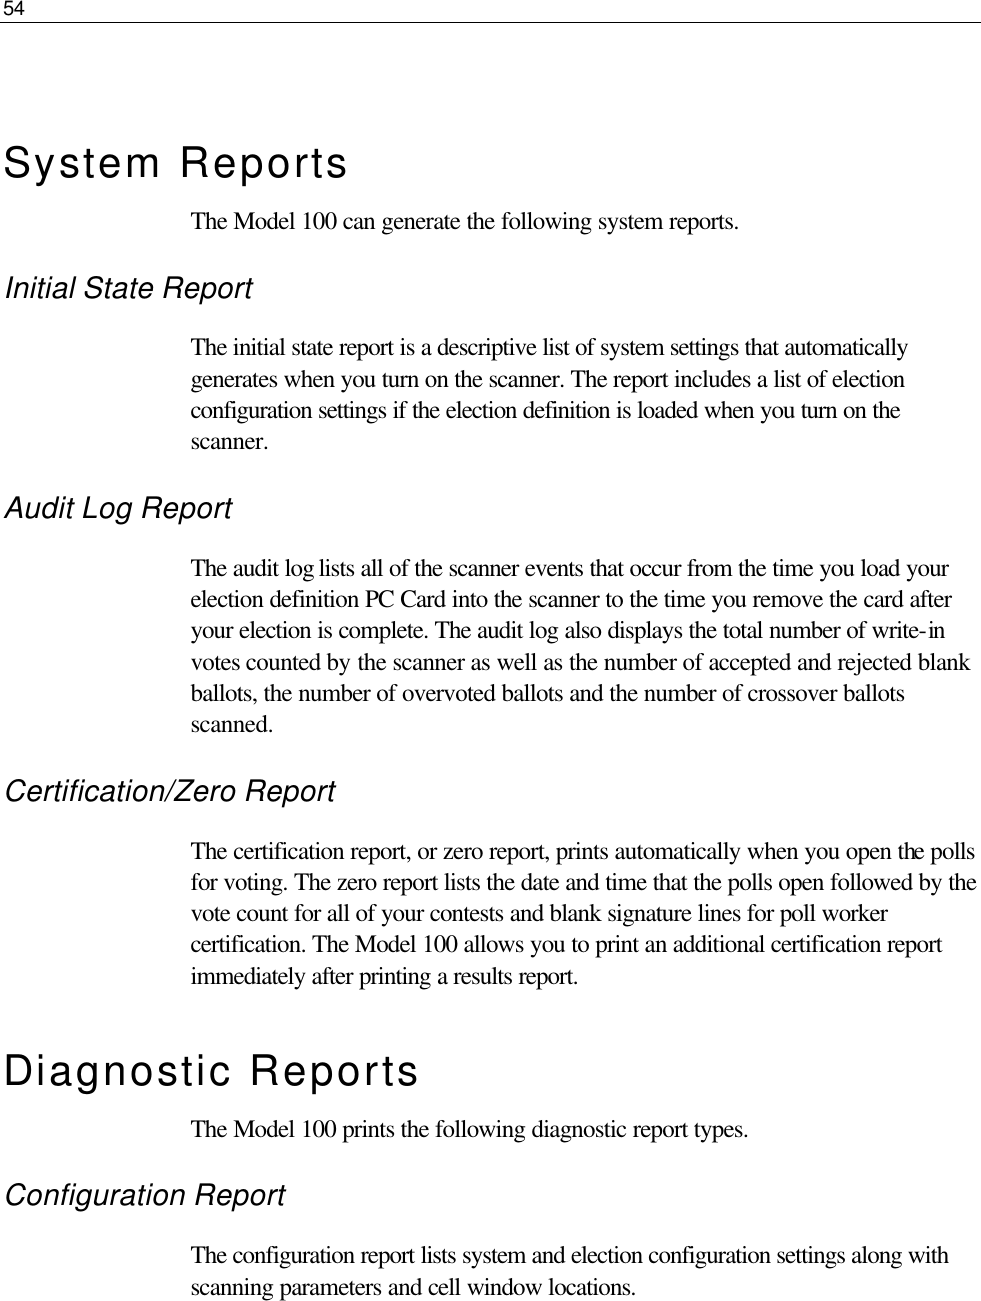 54   System Reports The Model 100 can generate the following system reports. Initial State Report  The initial state report is a descriptive list of system settings that automatically generates when you turn on the scanner. The report includes a list of election configuration settings if the election definition is loaded when you turn on the scanner.  Audit Log Report The audit log lists all of the scanner events that occur from the time you load your election definition PC Card into the scanner to the time you remove the card after your election is complete. The audit log also displays the total number of write-in votes counted by the scanner as well as the number of accepted and rejected blank ballots, the number of overvoted ballots and the number of crossover ballots scanned. Certification/Zero Report The certification report, or zero report, prints automatically when you open the polls for voting. The zero report lists the date and time that the polls open followed by the vote count for all of your contests and blank signature lines for poll worker certification. The Model 100 allows you to print an additional certification report immediately after printing a results report. Diagnostic Reports The Model 100 prints the following diagnostic report types. Configuration Report The configuration report lists system and election configuration settings along with scanning parameters and cell window locations. 